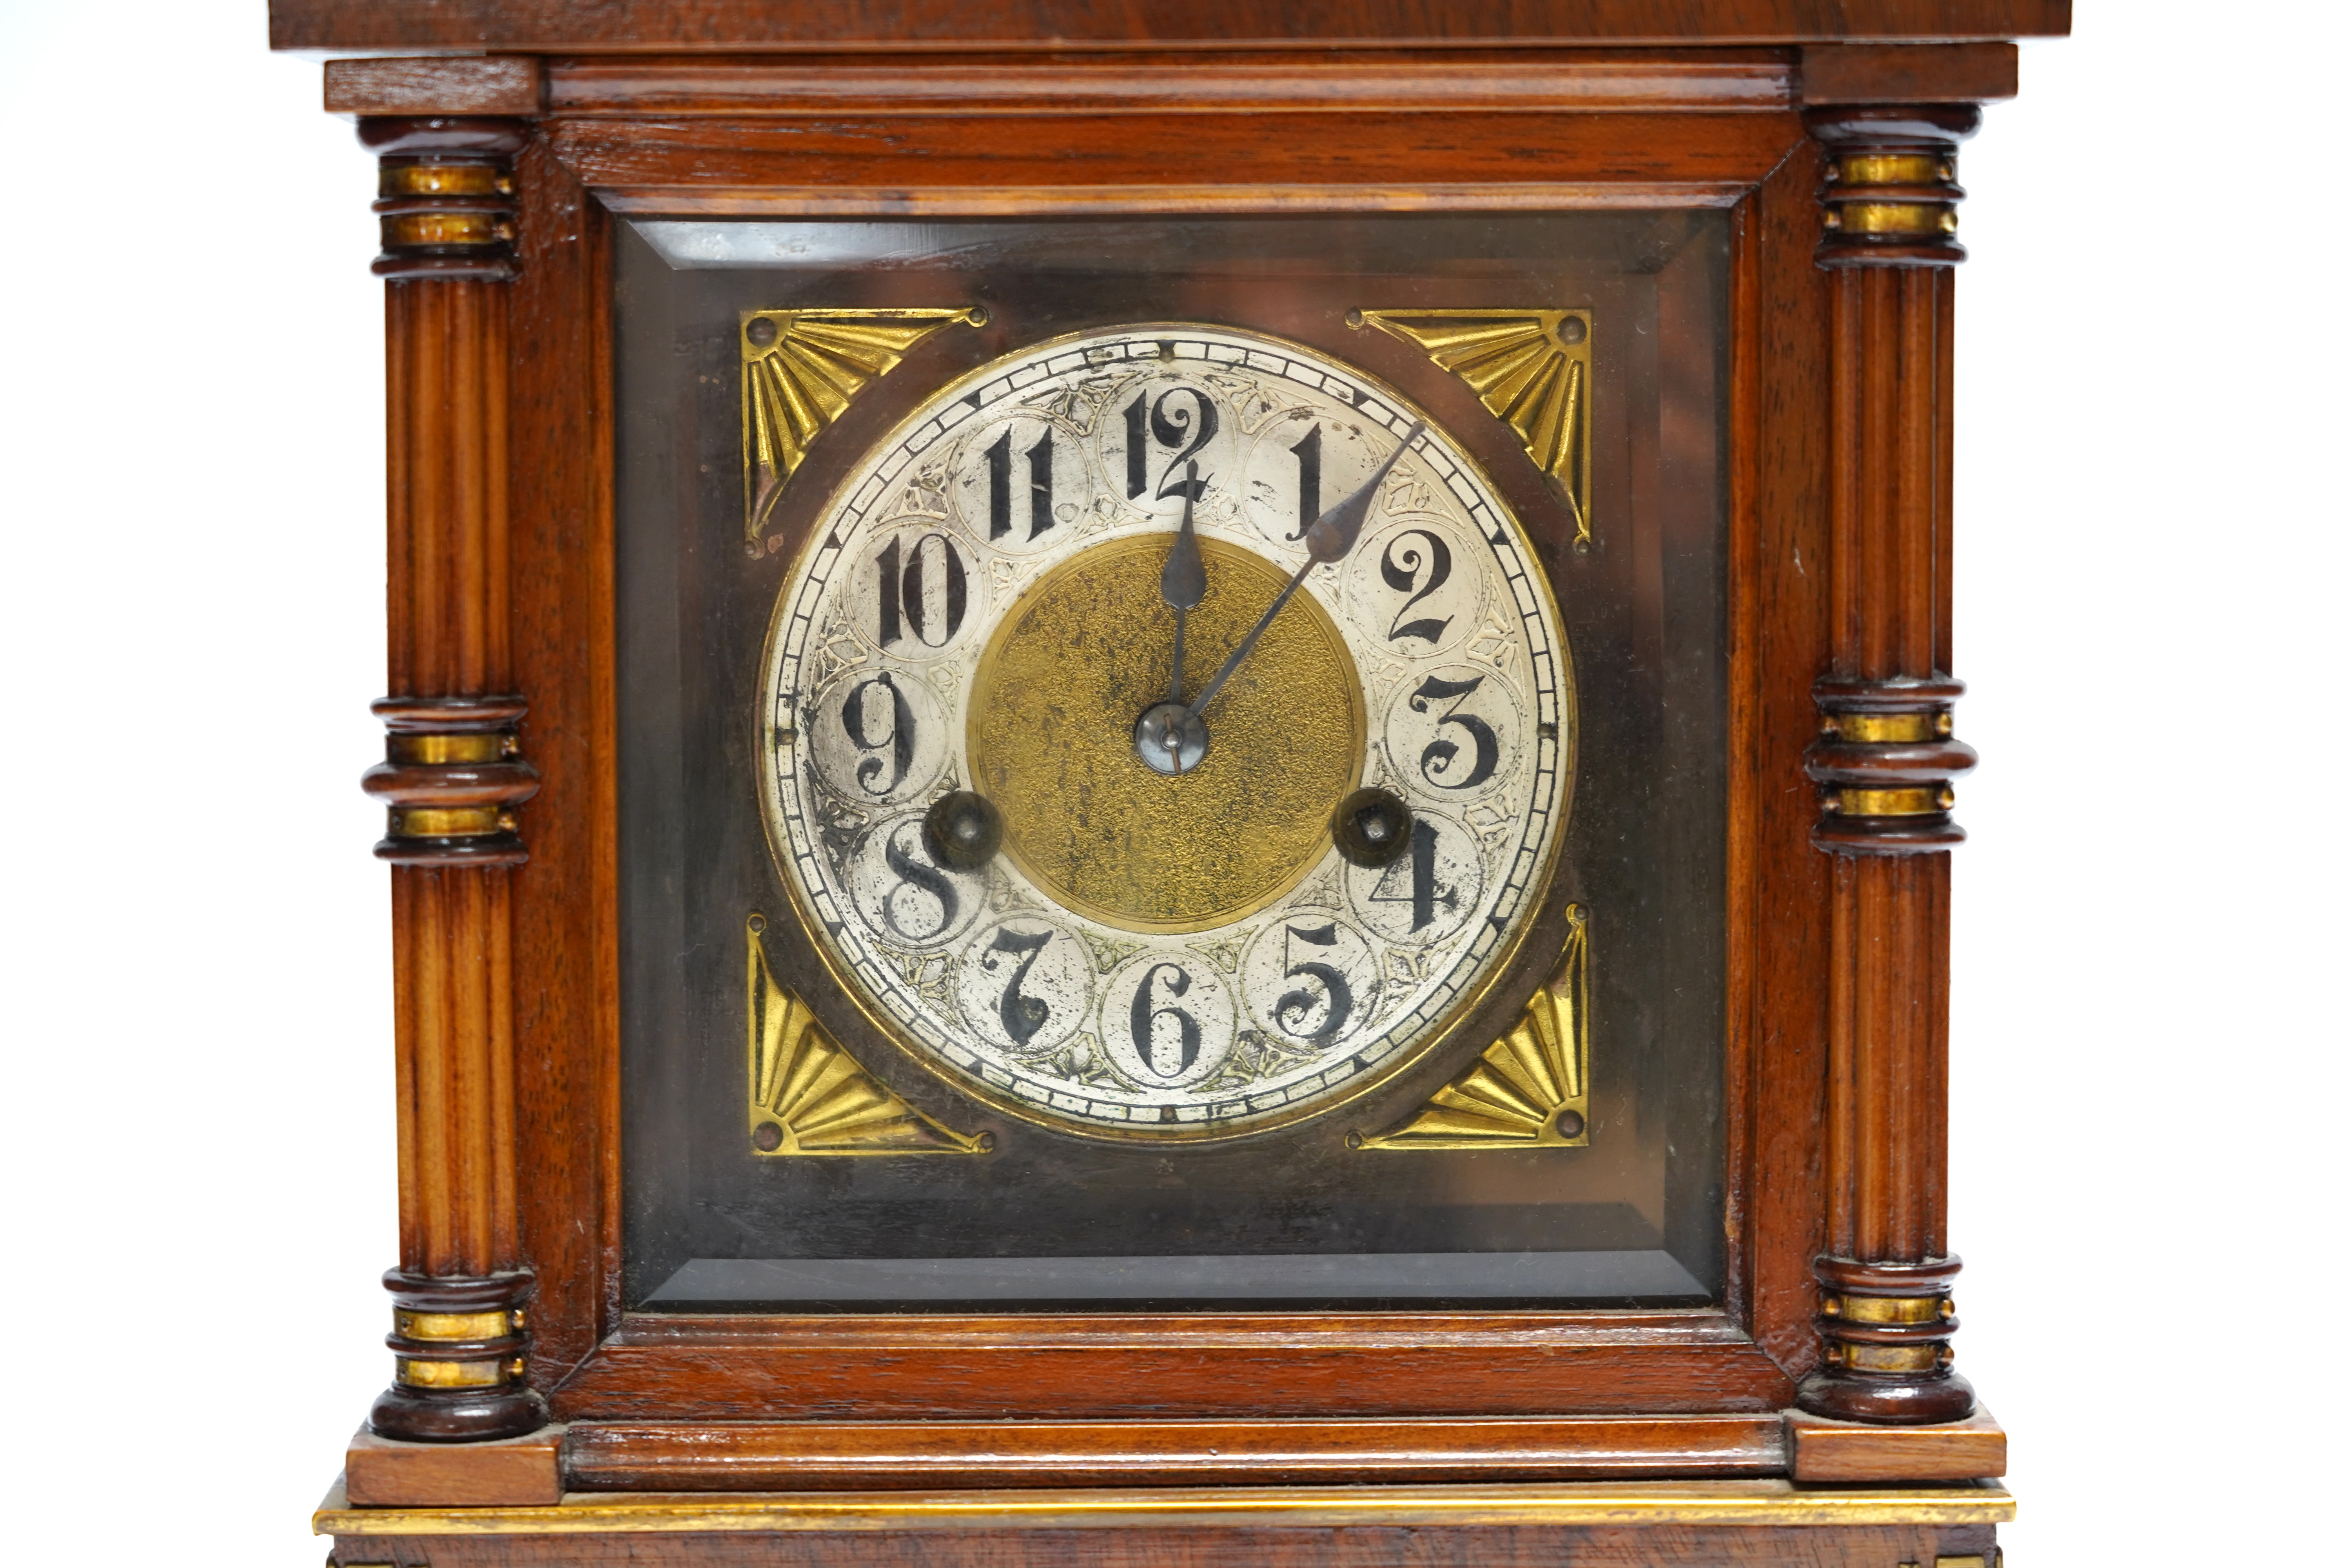 A Black Forest mantel clock with an HAC, Wurttemberg movement, striking on a coiled gong, 35cm high together with an early 20th century inlaid mahogany mantel clock